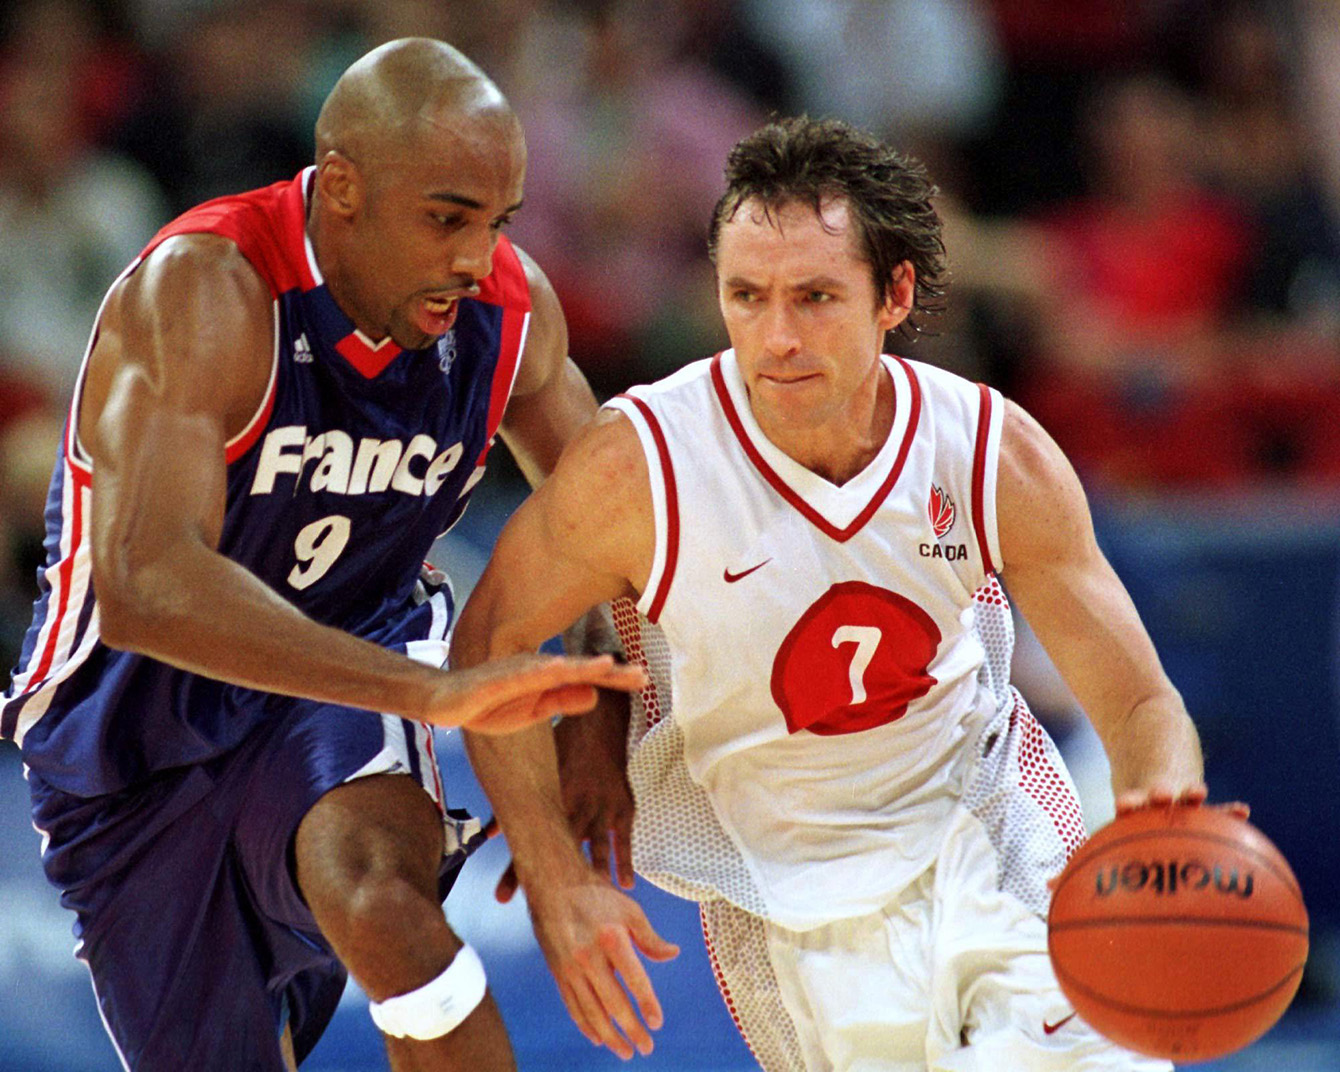 Steve Nash competes in the men's basketball tournament at the Sydney 2000 Olympics.